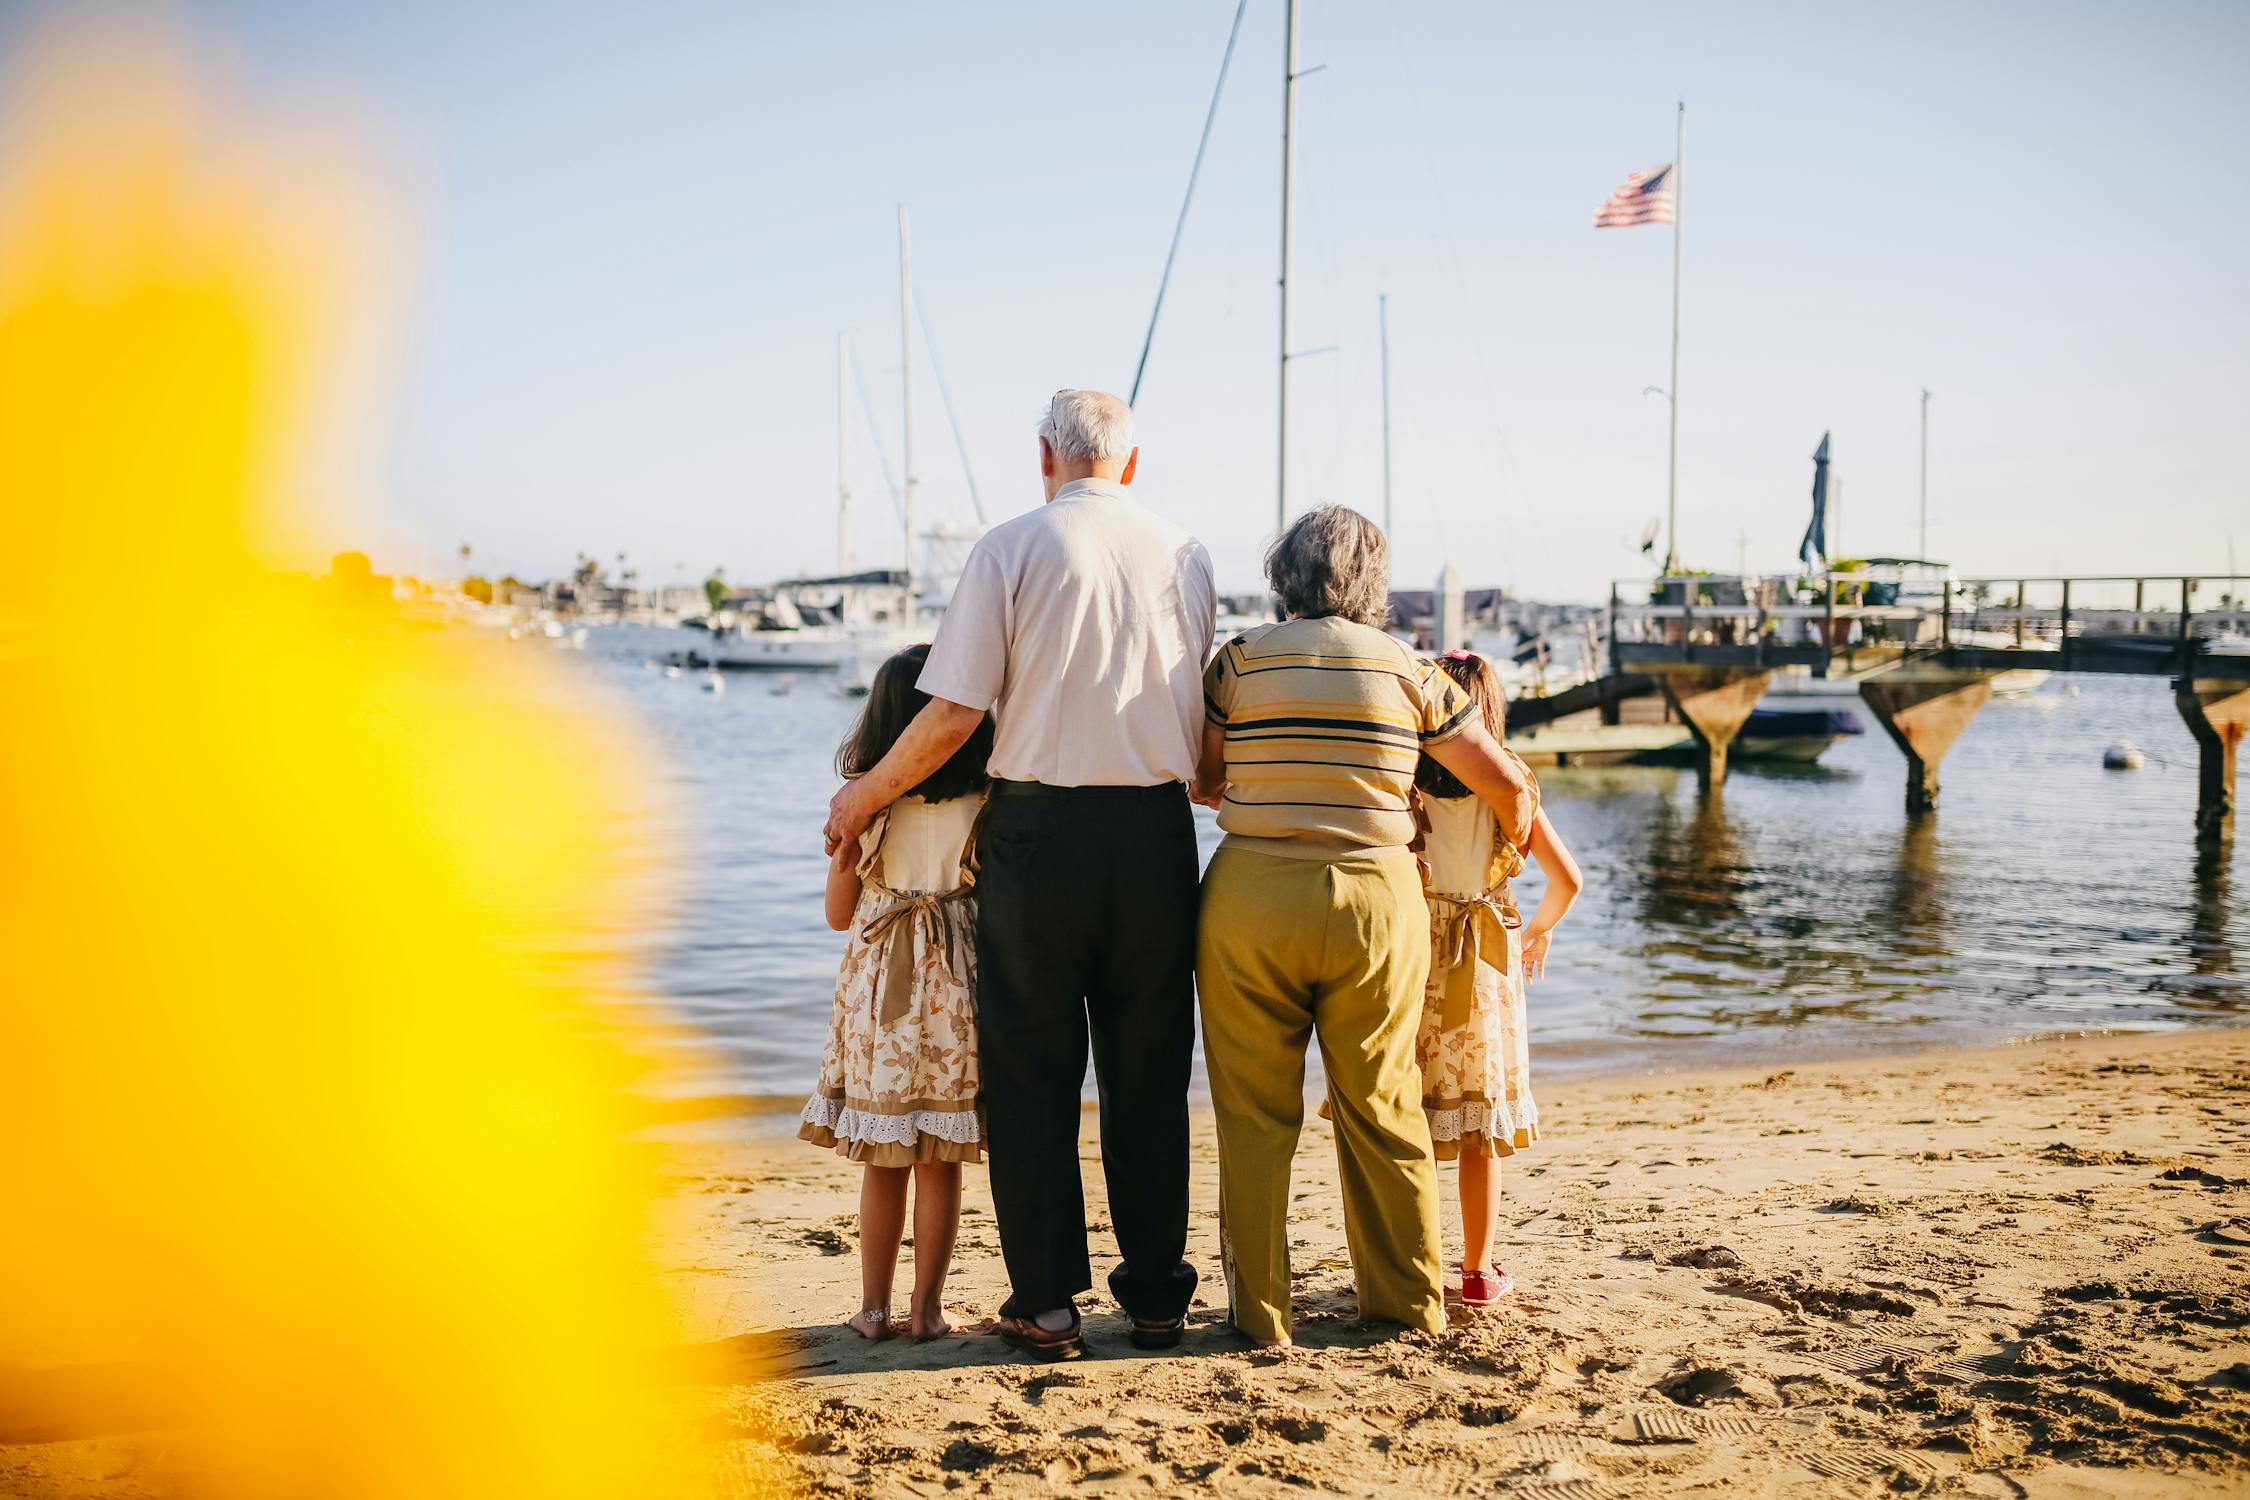 Grand Parents Photo by RDNE Stock project from Pexels: https://www.pexels.com/photo/grandparents-with-their-granddaughters-standing-by-the-shore-5637770/